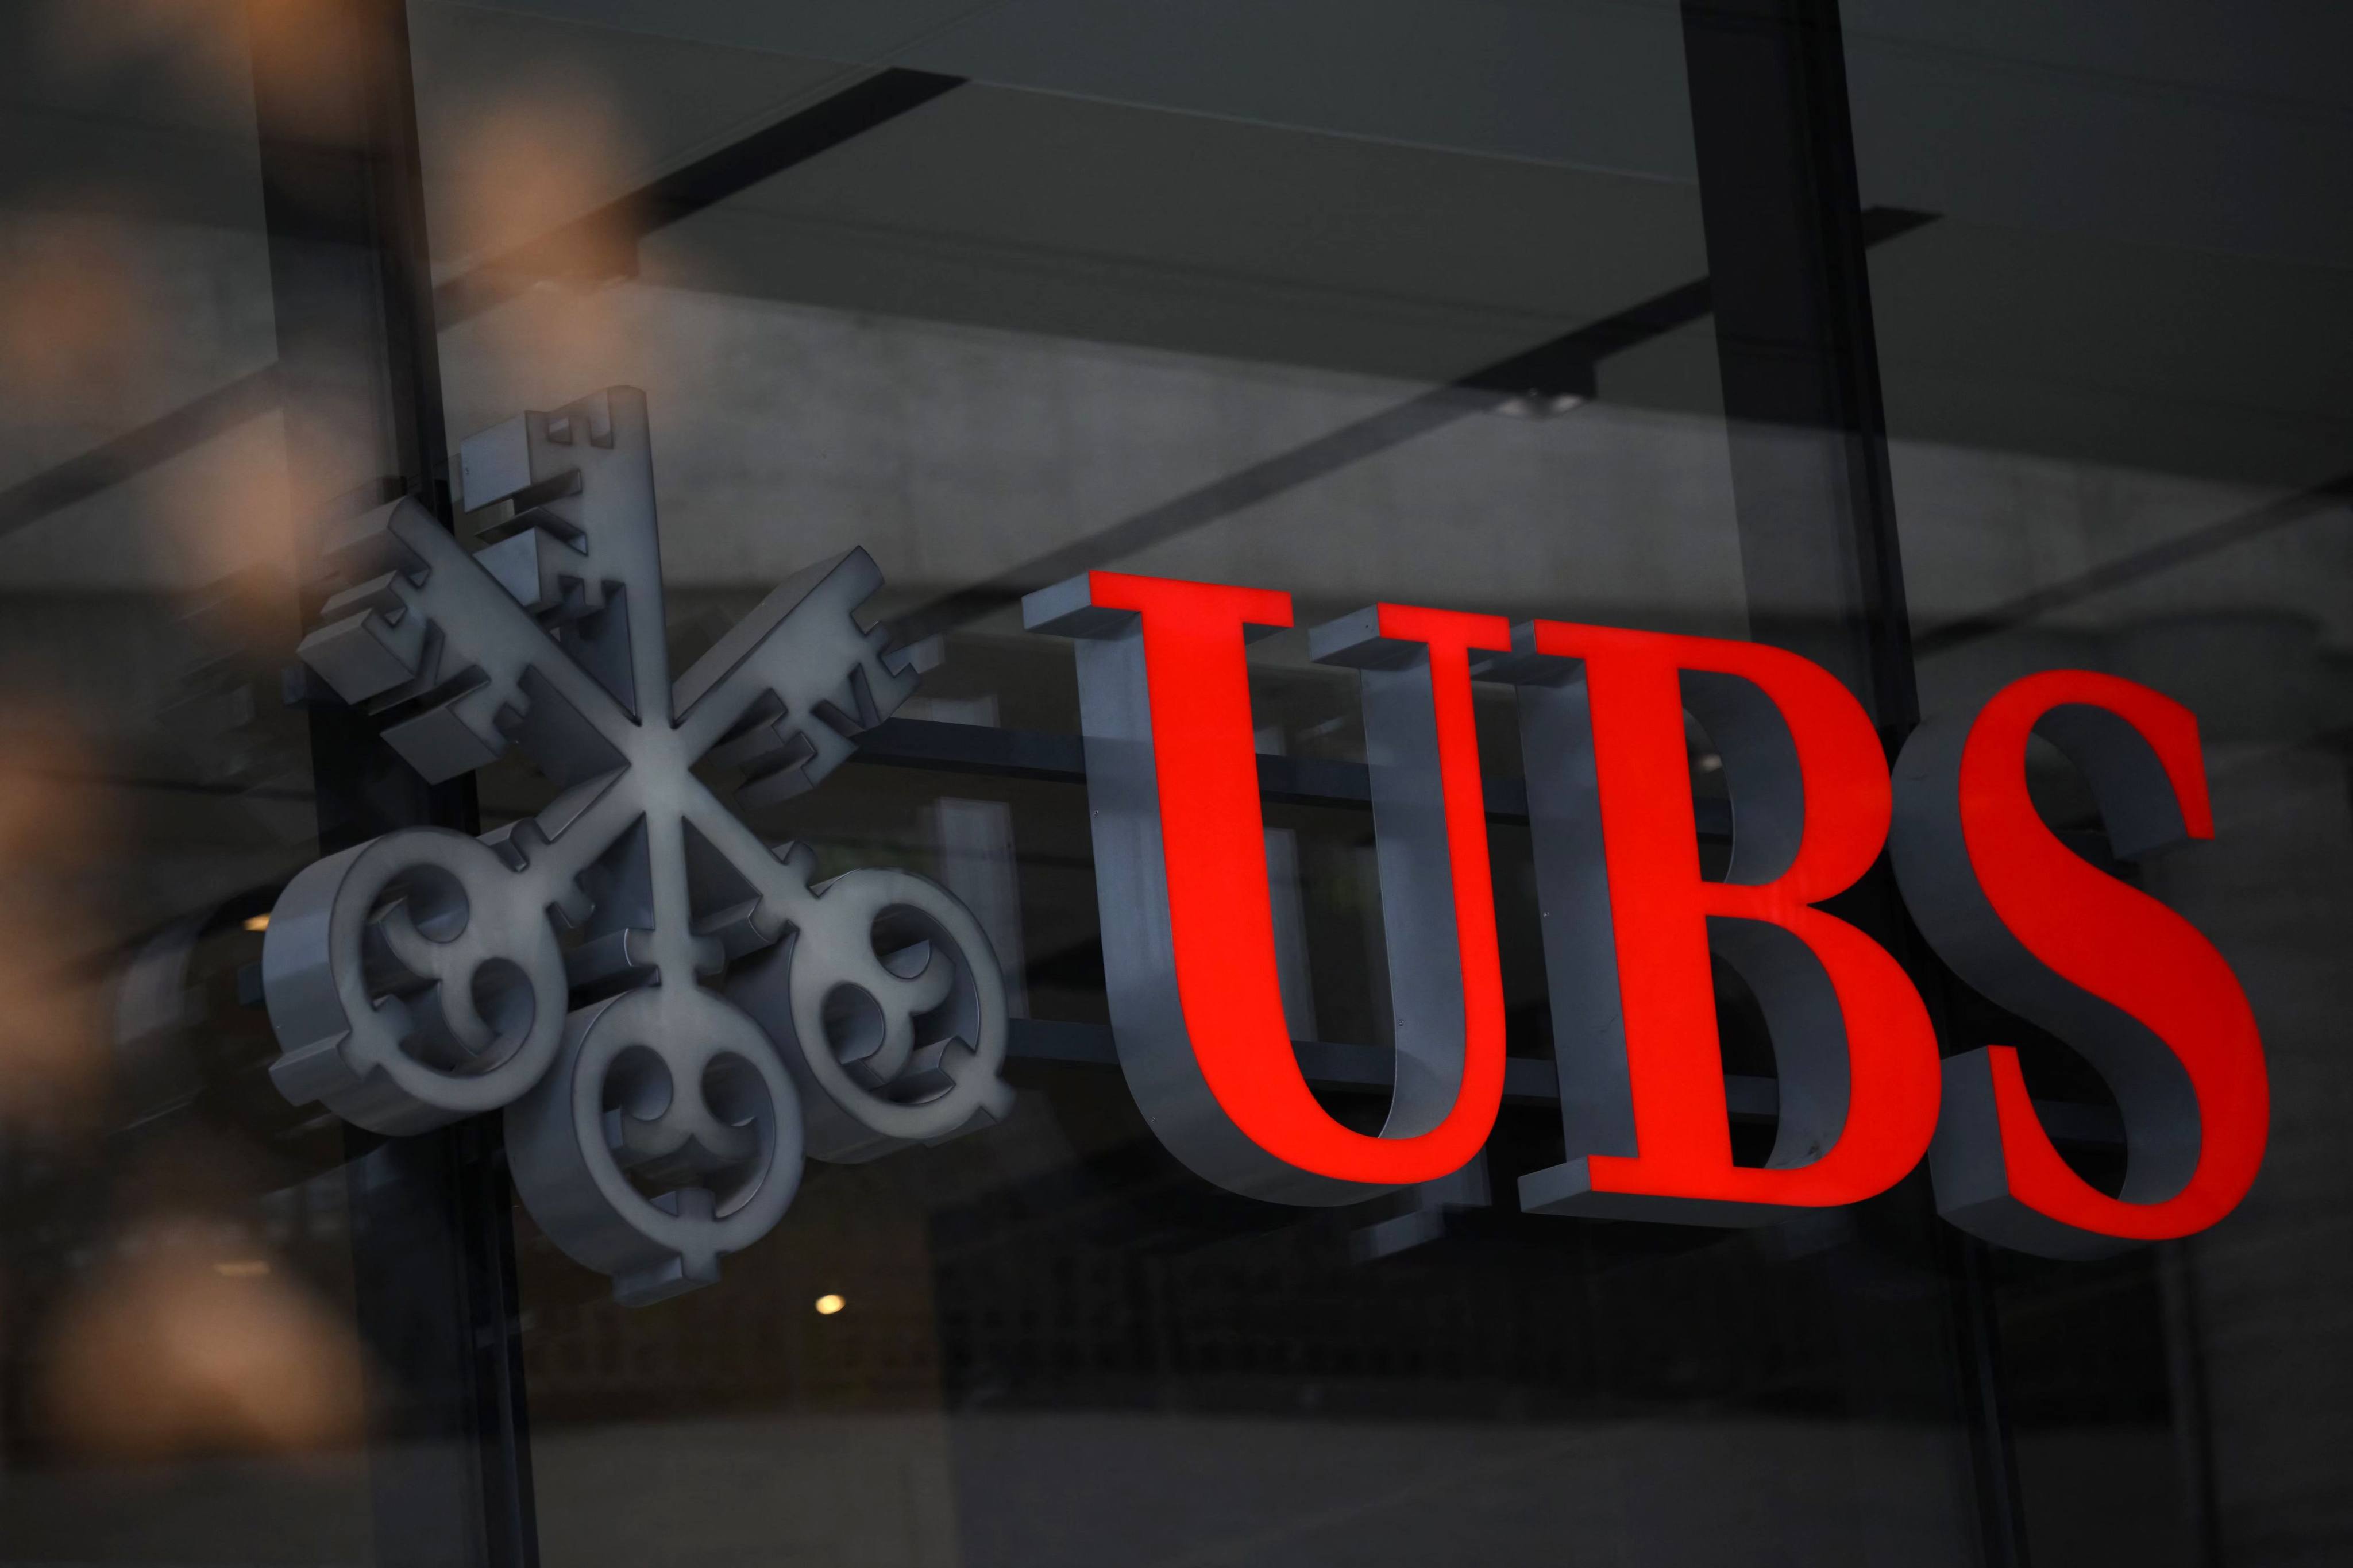 Hong Kong court jails ex-UBS banker for 7 years over theft, money laundering. Photo: AFP